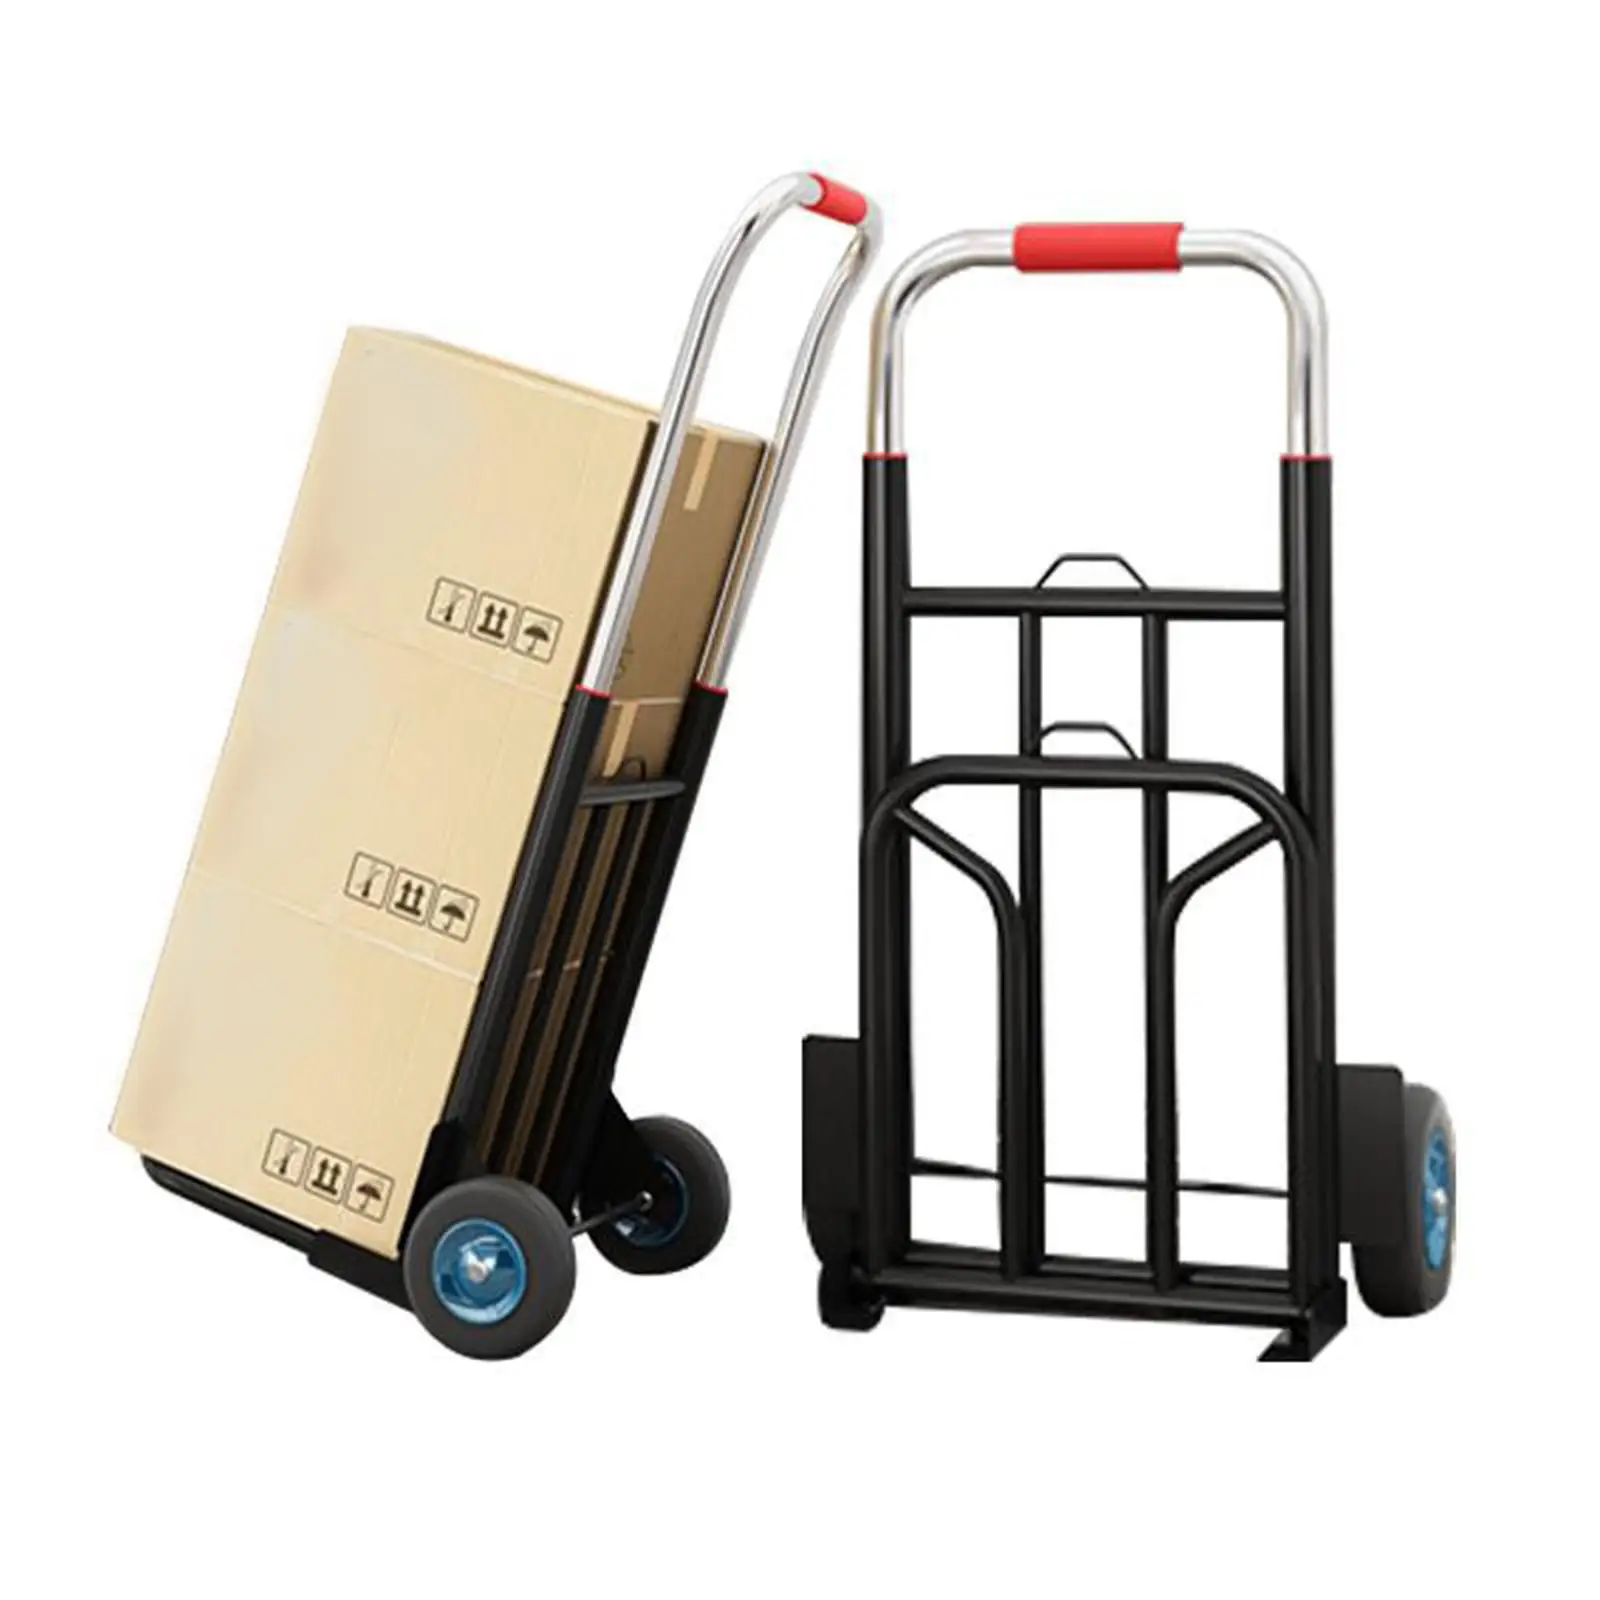 Foldable Hand Truck Luggage Hand Cart Telescopic 50cm-80cm 27x40cm Platform with 3 Elastic Ropes Adjustable Handle for Office